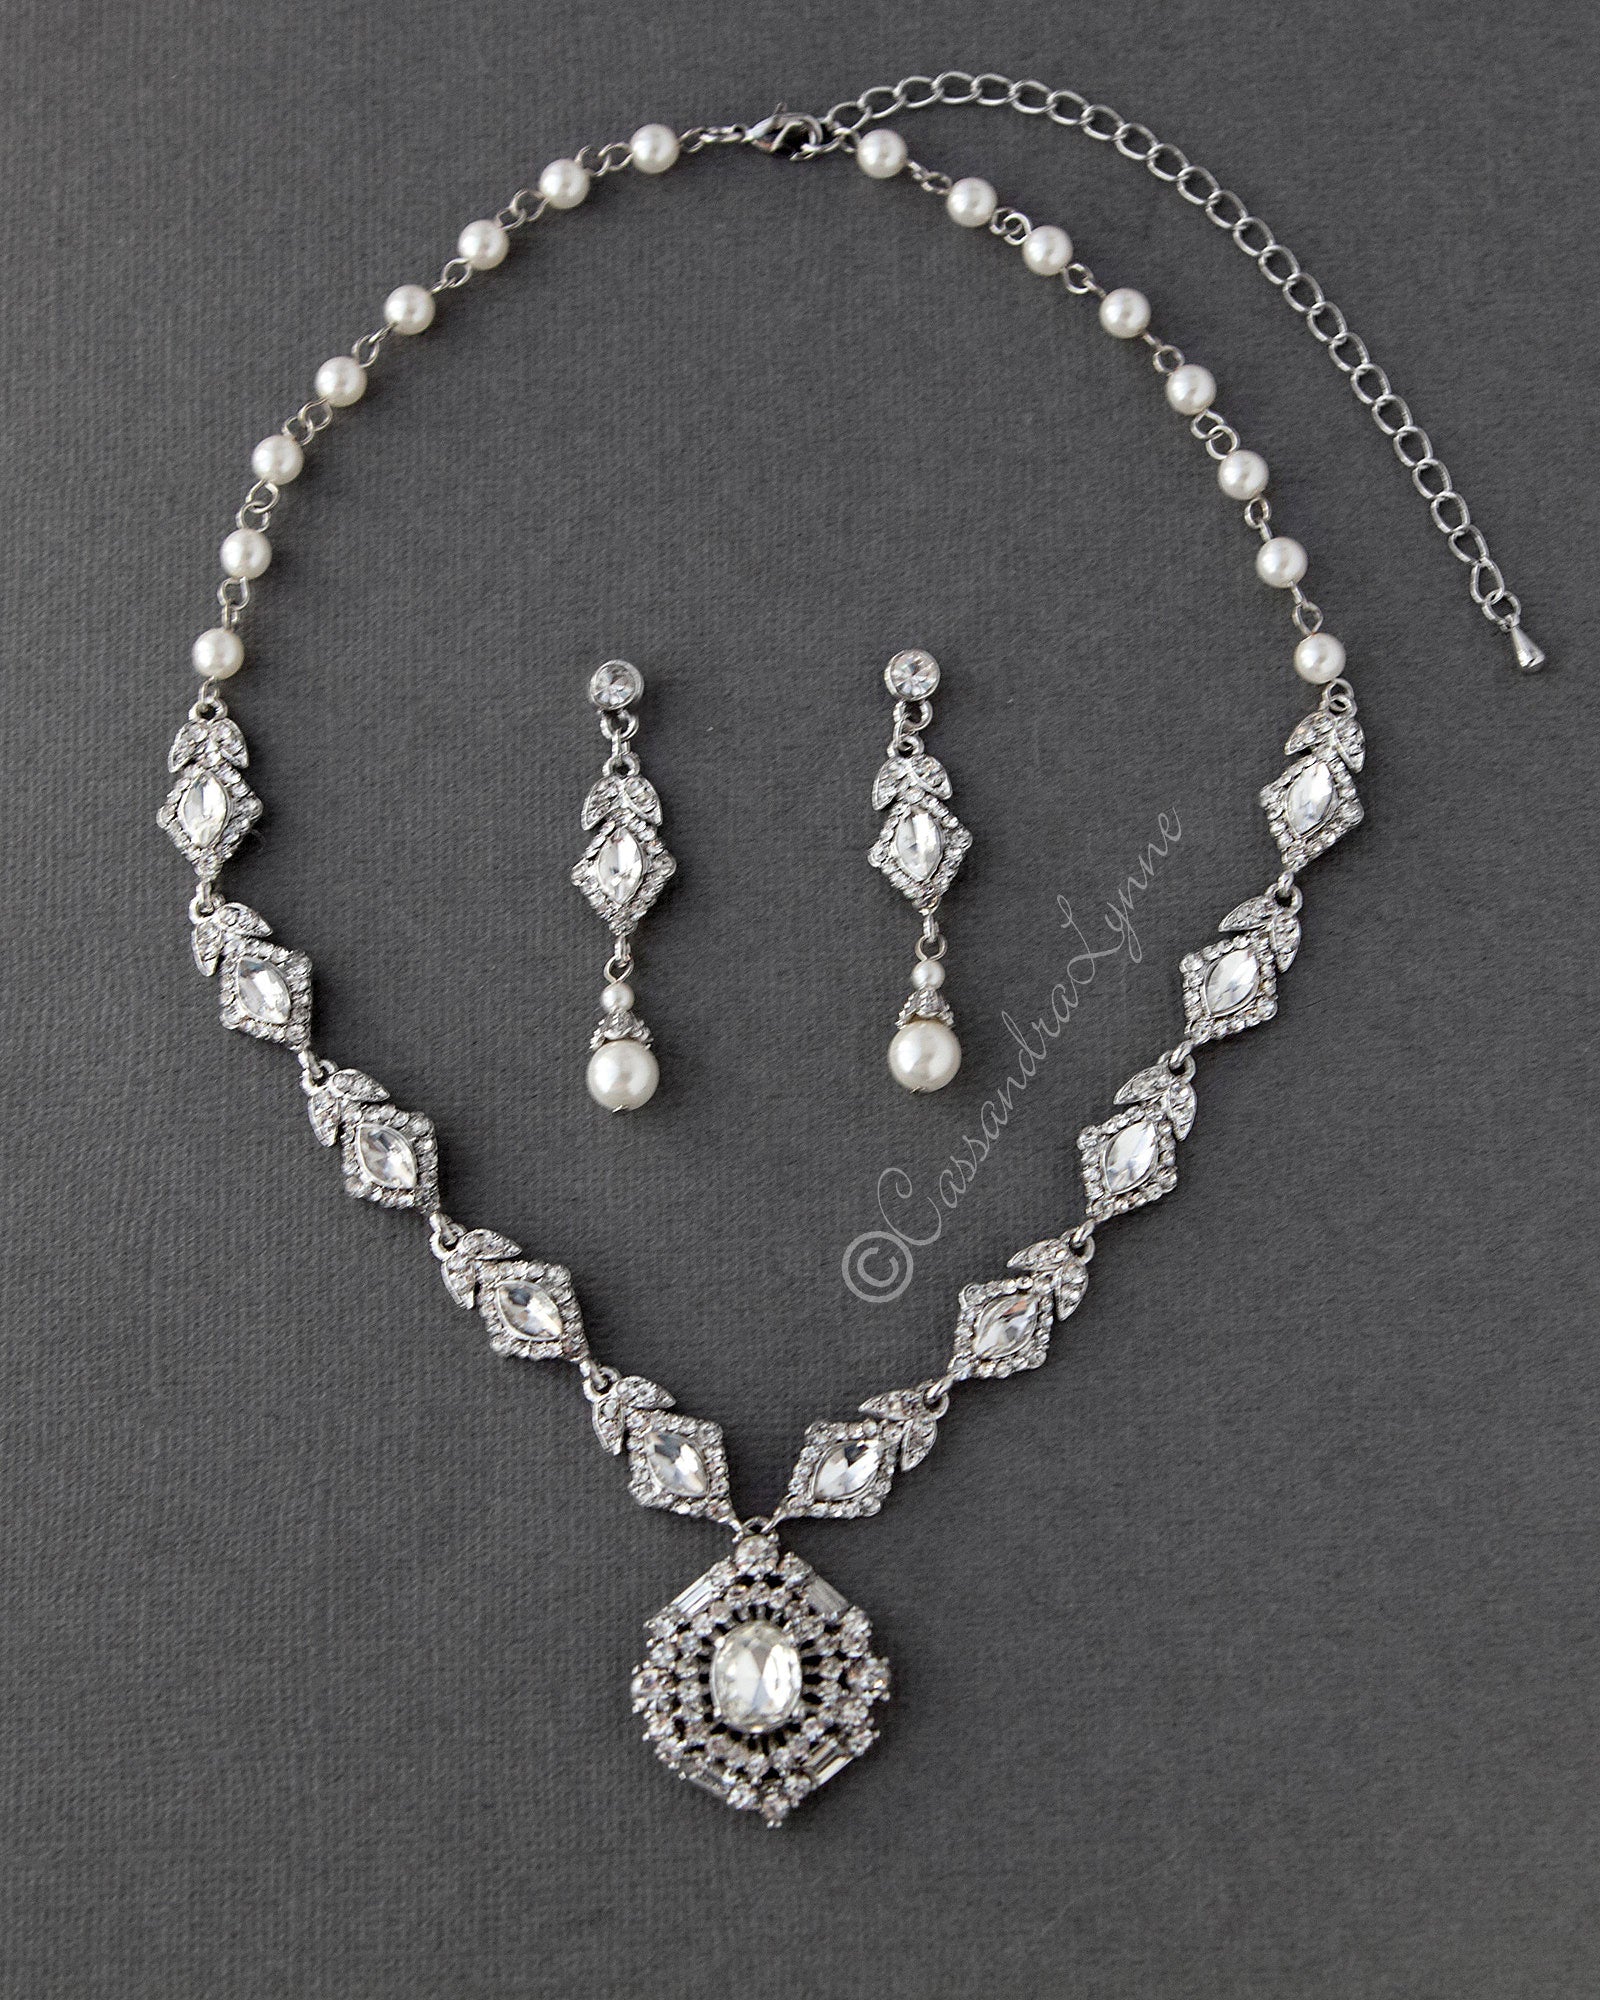 Vintage Wedding Necklace Set of Pearls and Jewels - Cassandra Lynne